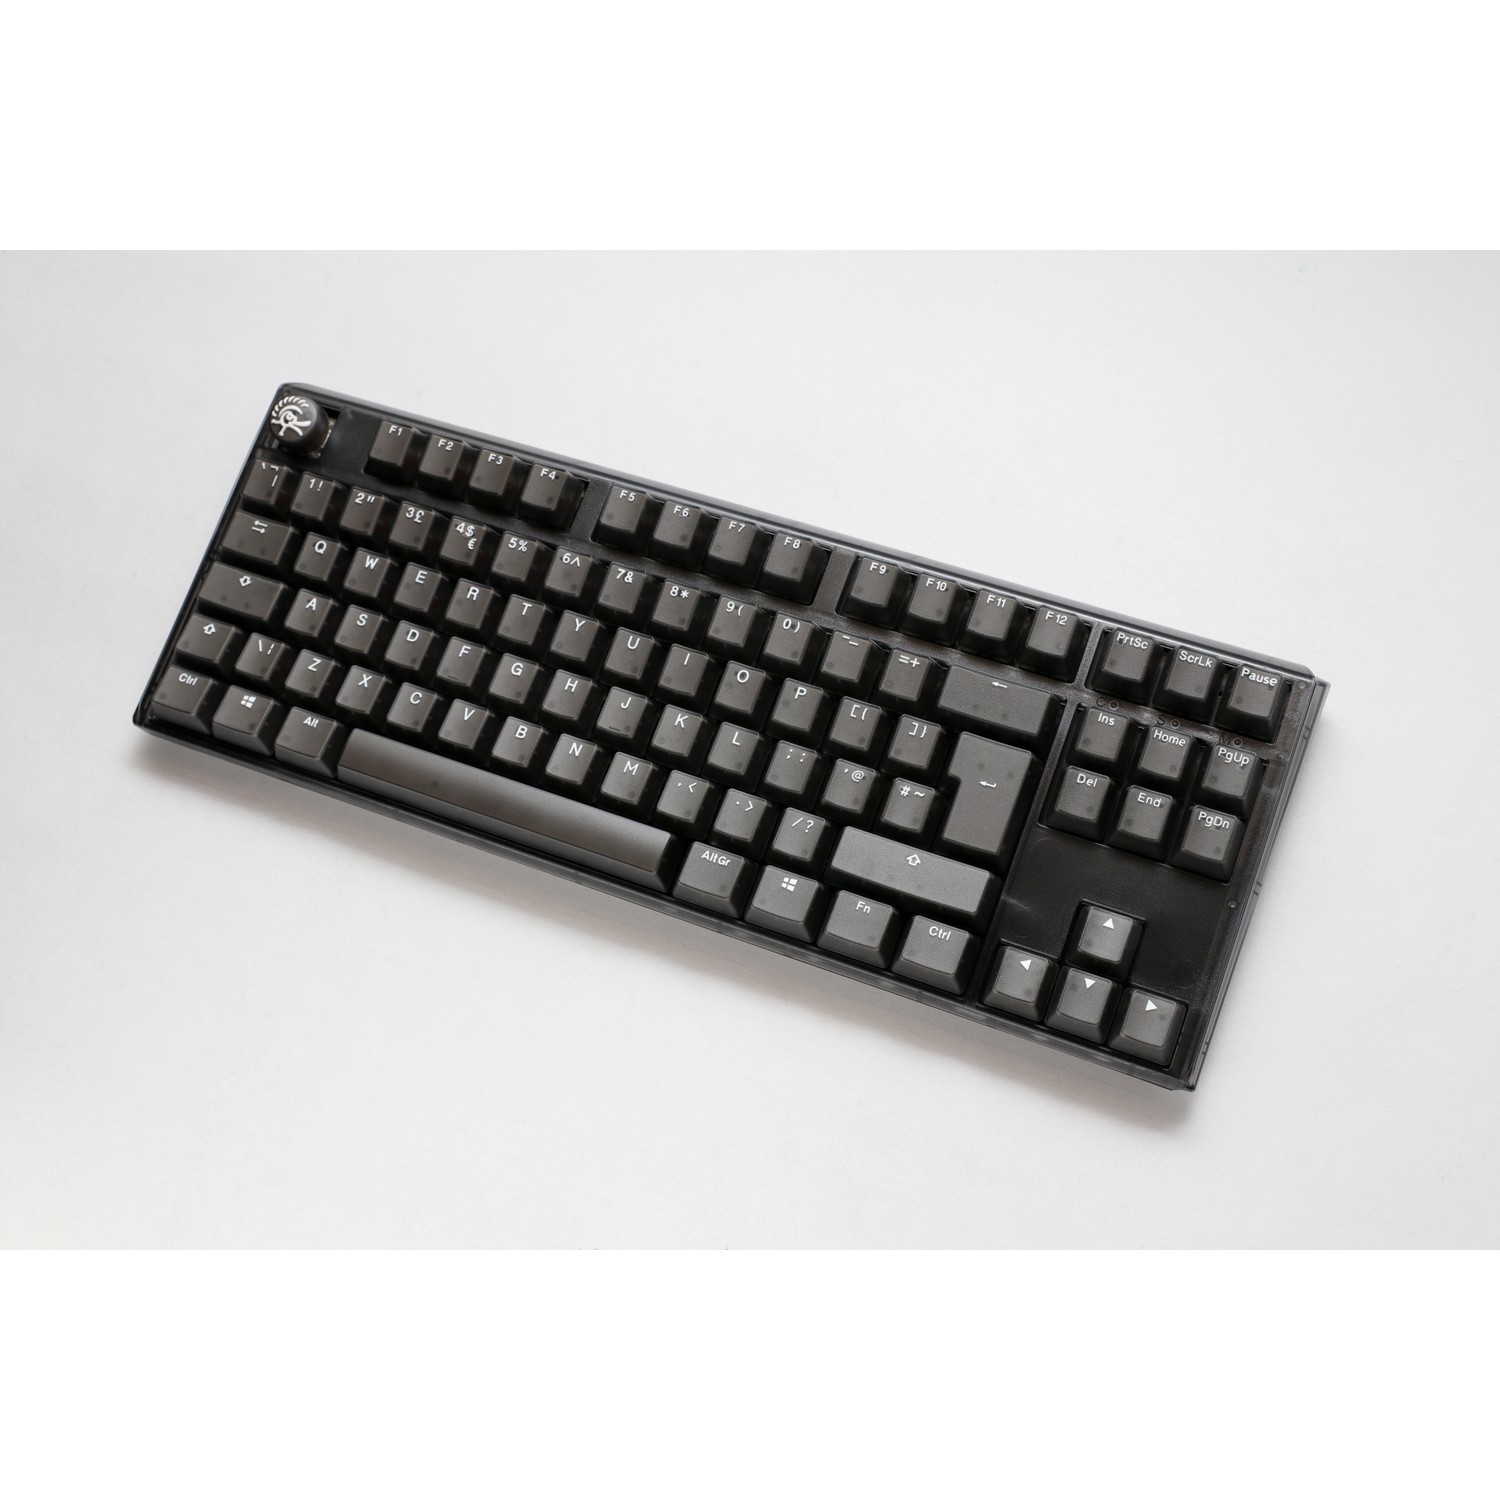 Ducky - Ducky One 3 Aura TKL 80% Mechanical Gaming Keyboard Black Cherry Silent Red Switch UK Layout